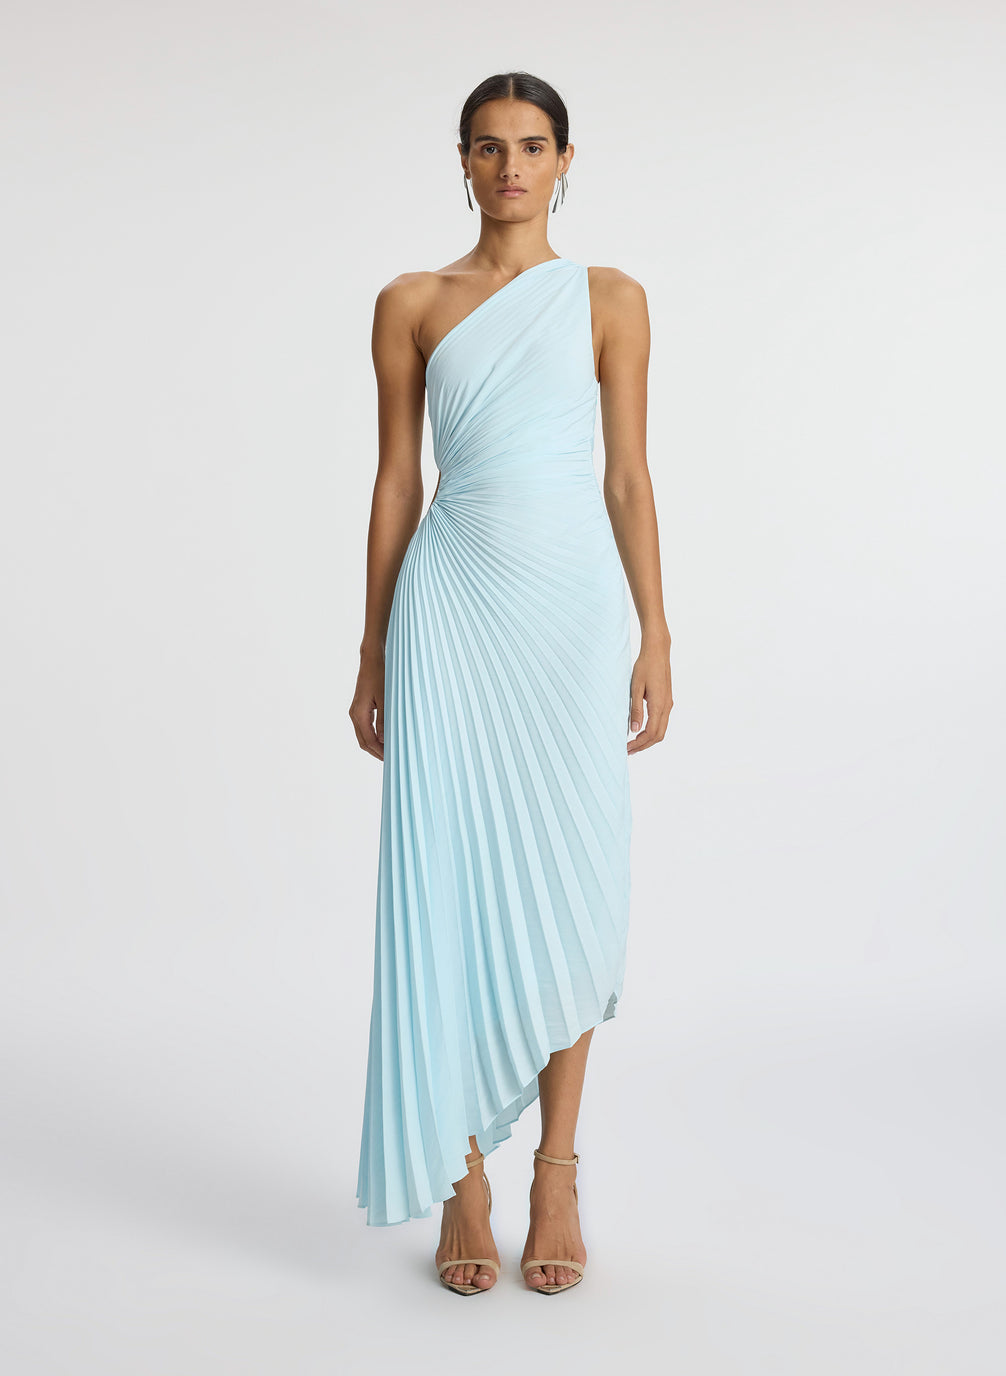 front view of woman wearing aqua pleated one shoulder dress